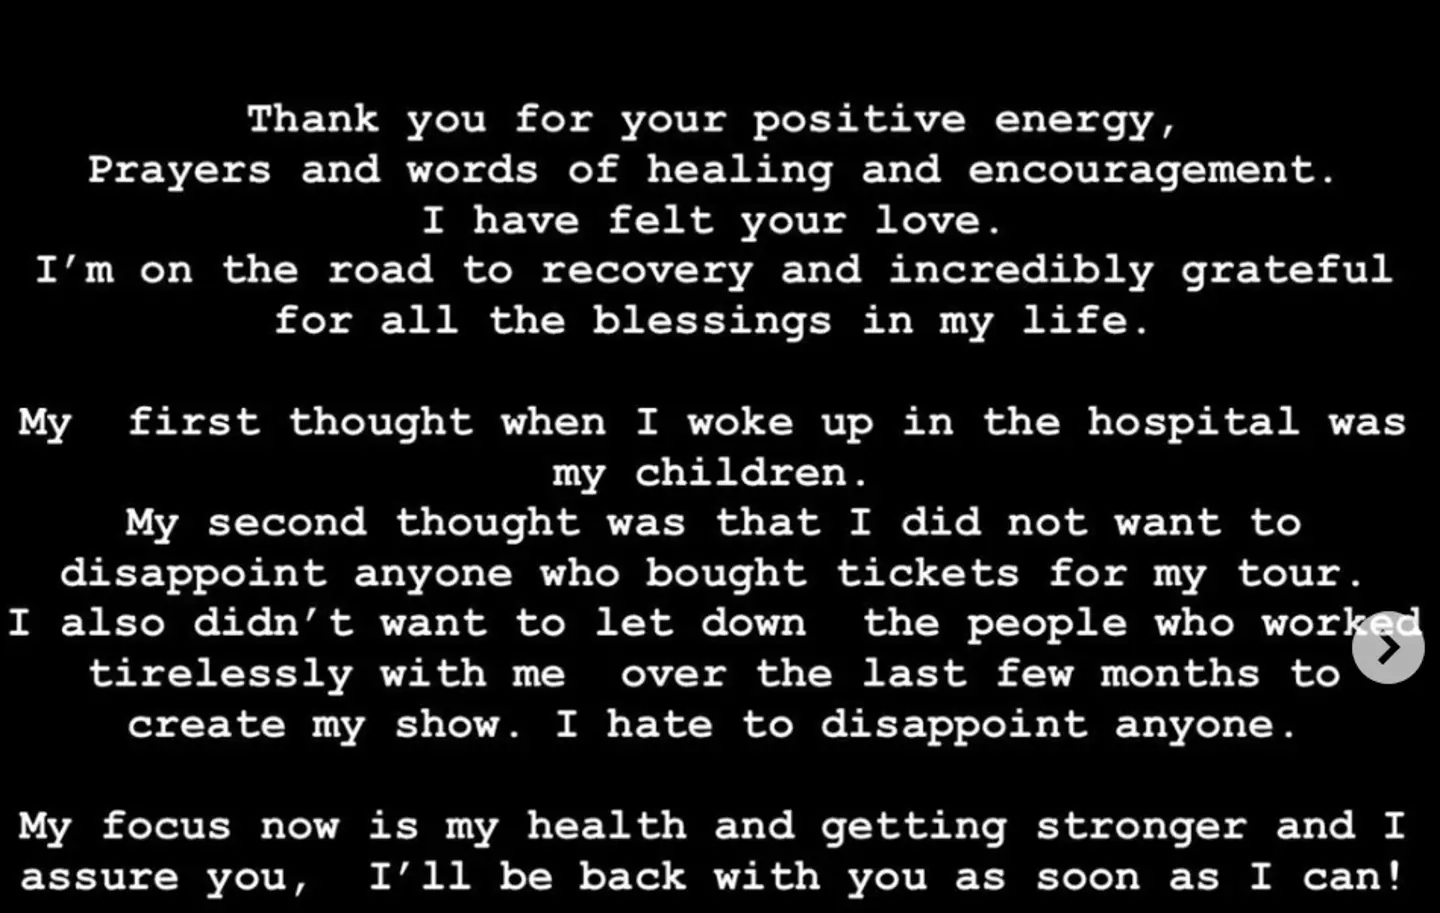 Madonna shared a statement on her health after being released from hospital.